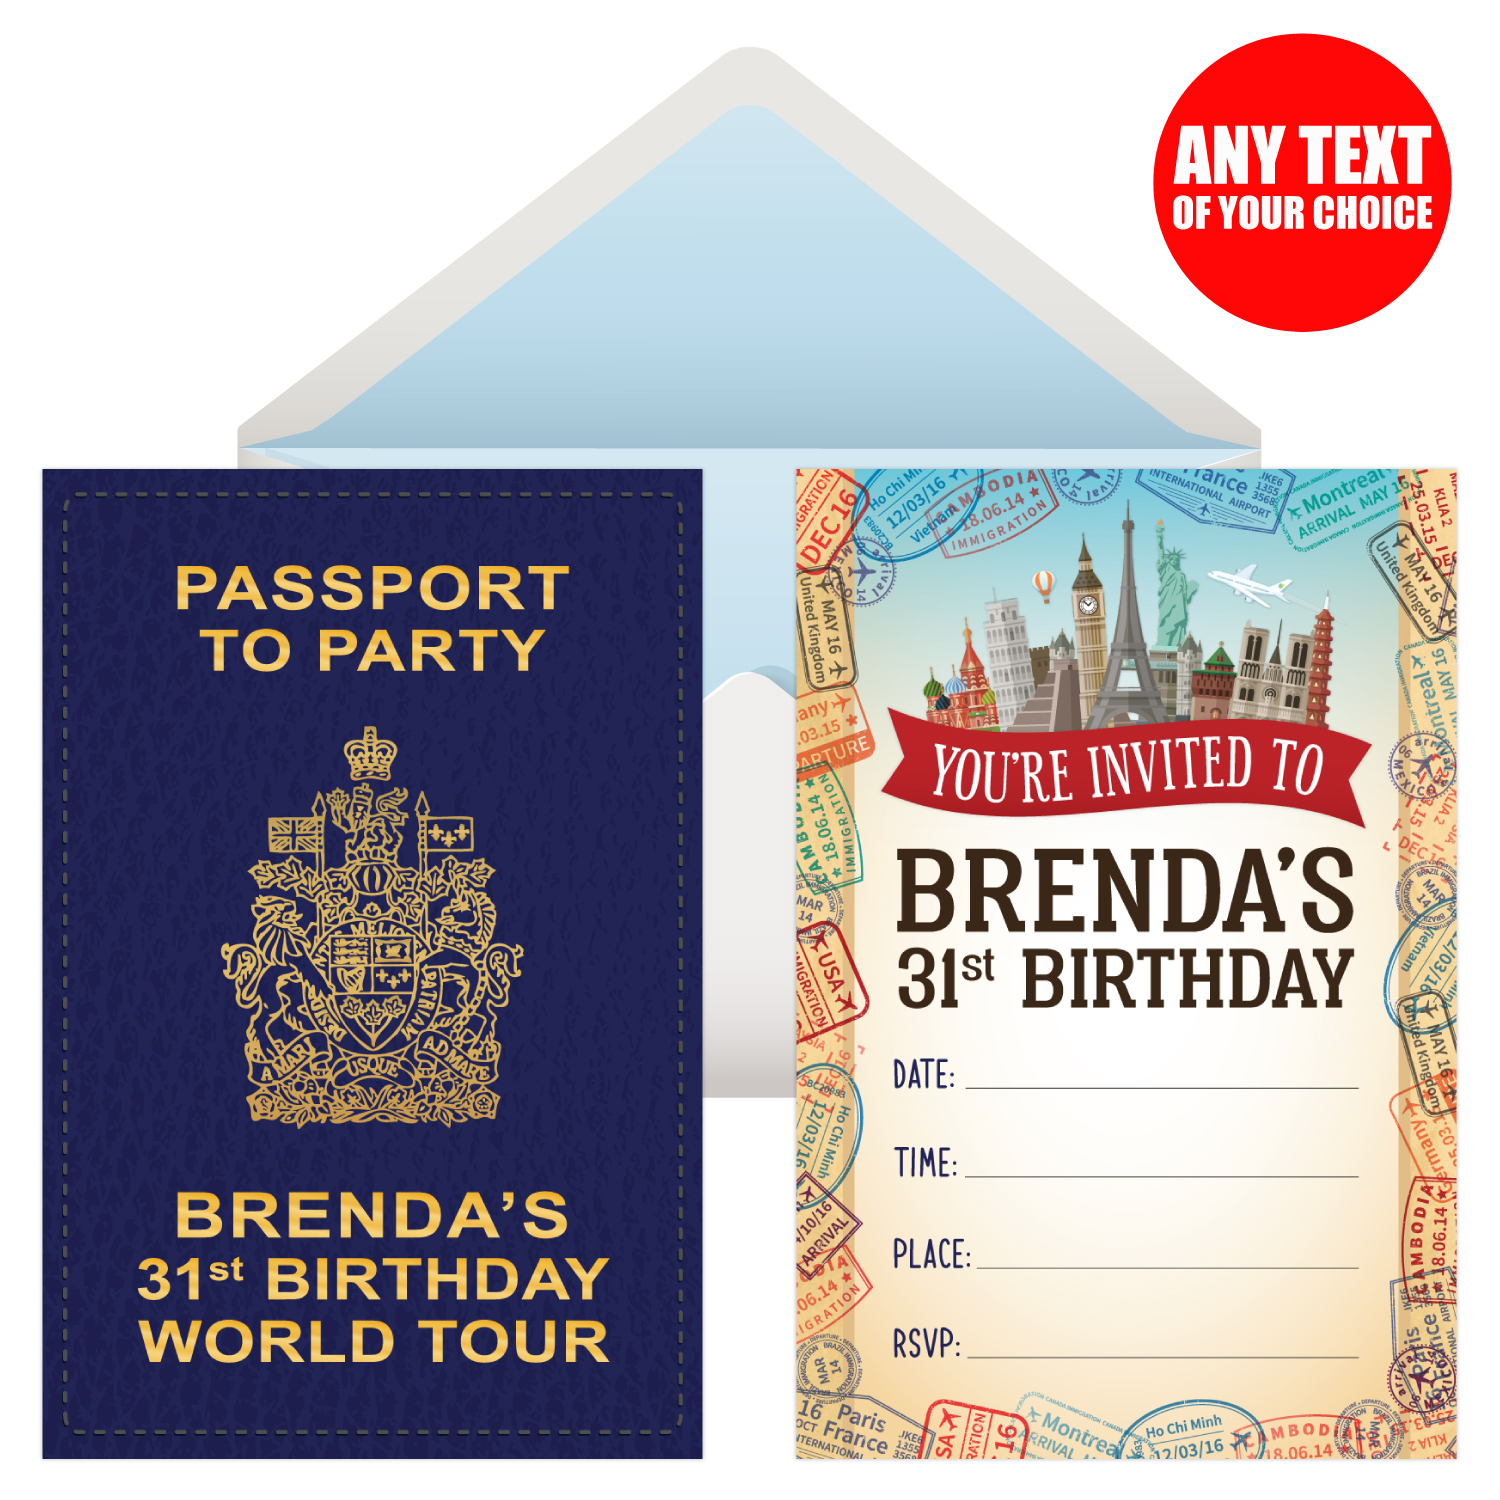 Travel Around The World Party Supplies Party Supplies Canada Open A Party - roblox personalized invitations 8 pack party supplies canada open a party